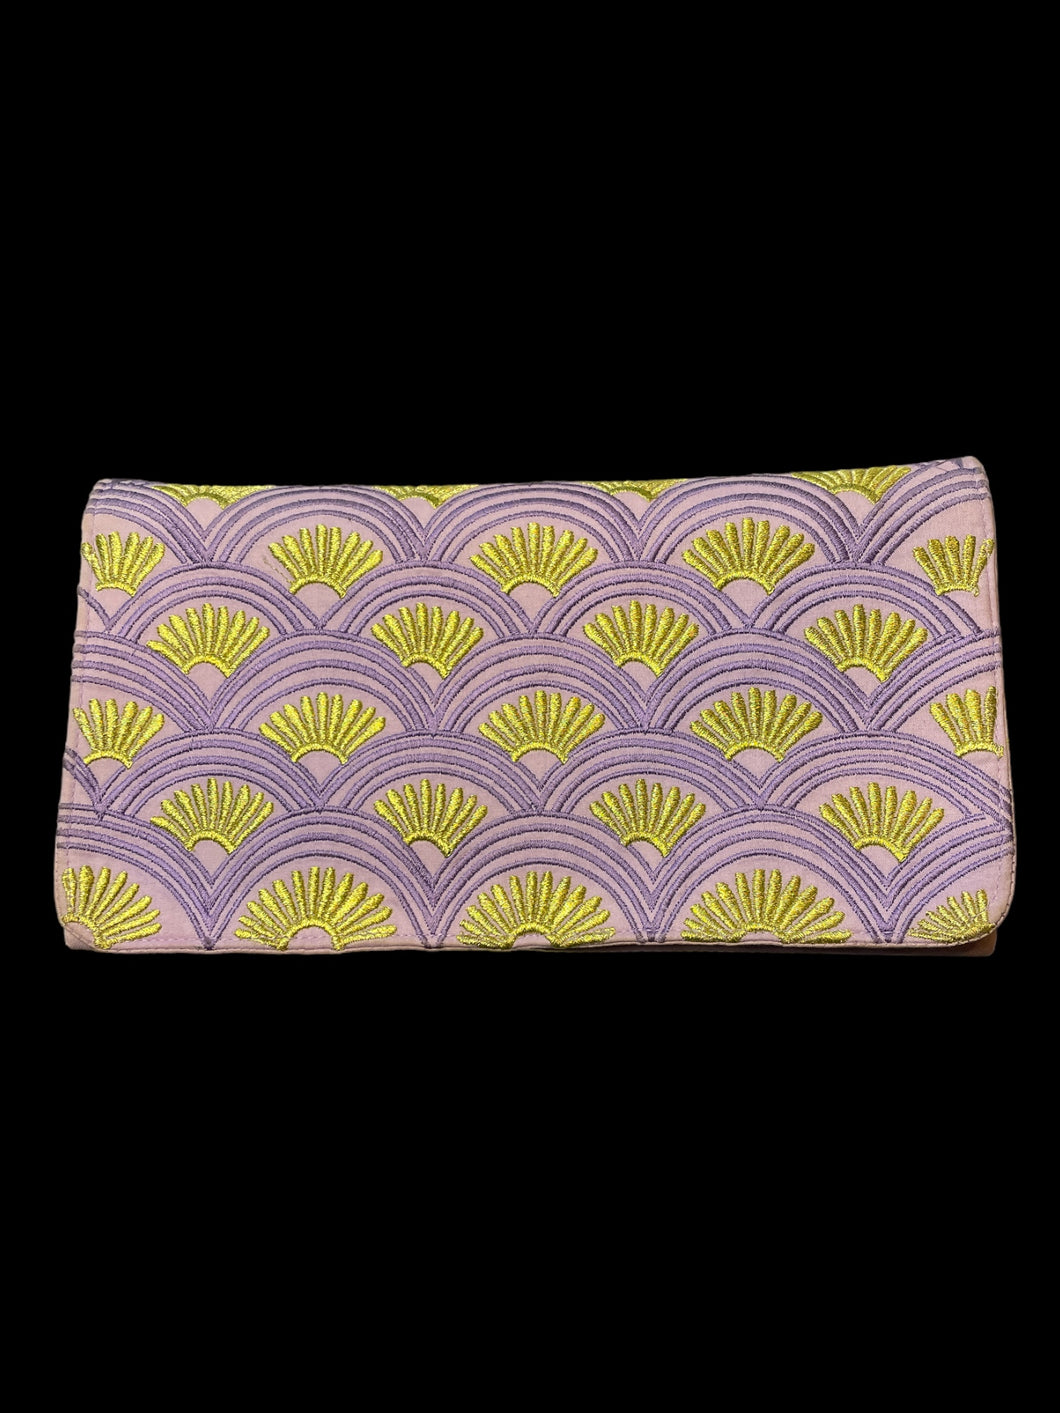 Lilac clutch bag w/ purple scalloped embroidery, metallic gold embroidered accents, inner zipper pocket, & magnetic clasp